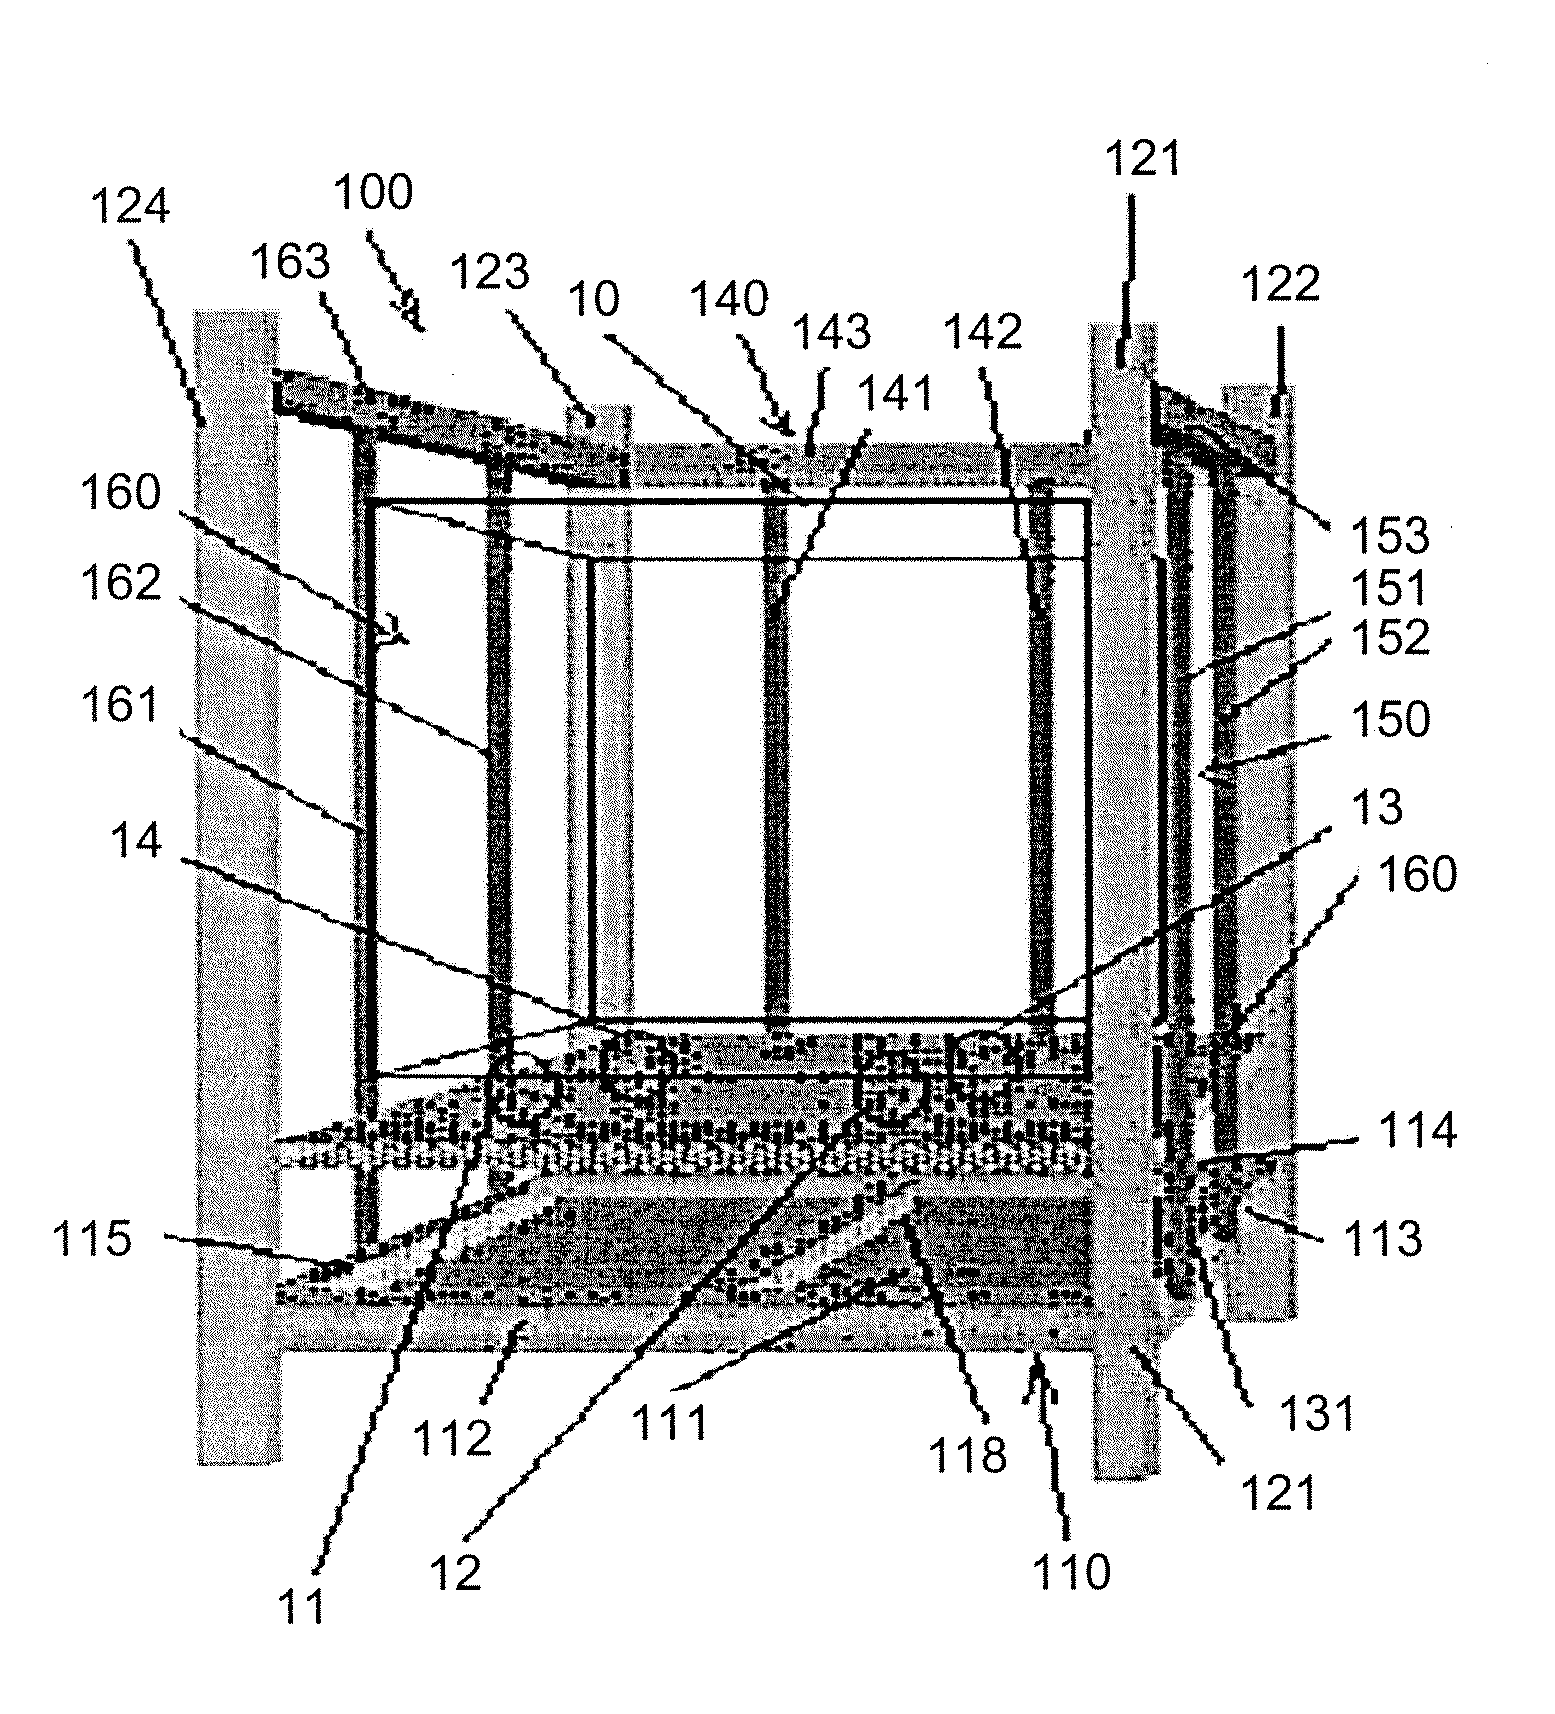 Packaging device and buffer